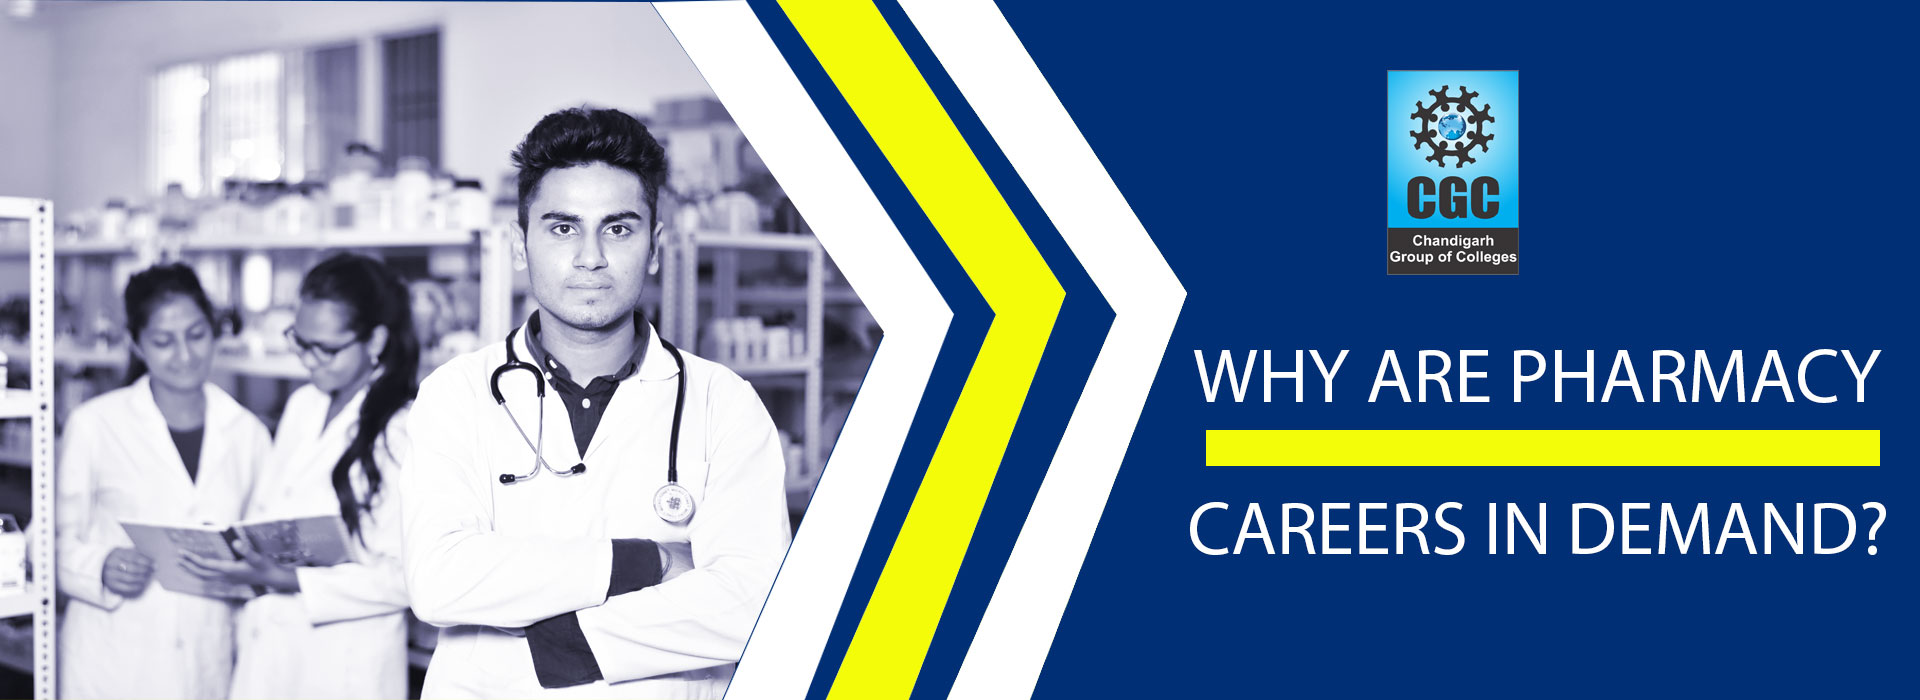 Why are Pharmacy careers in demand? 